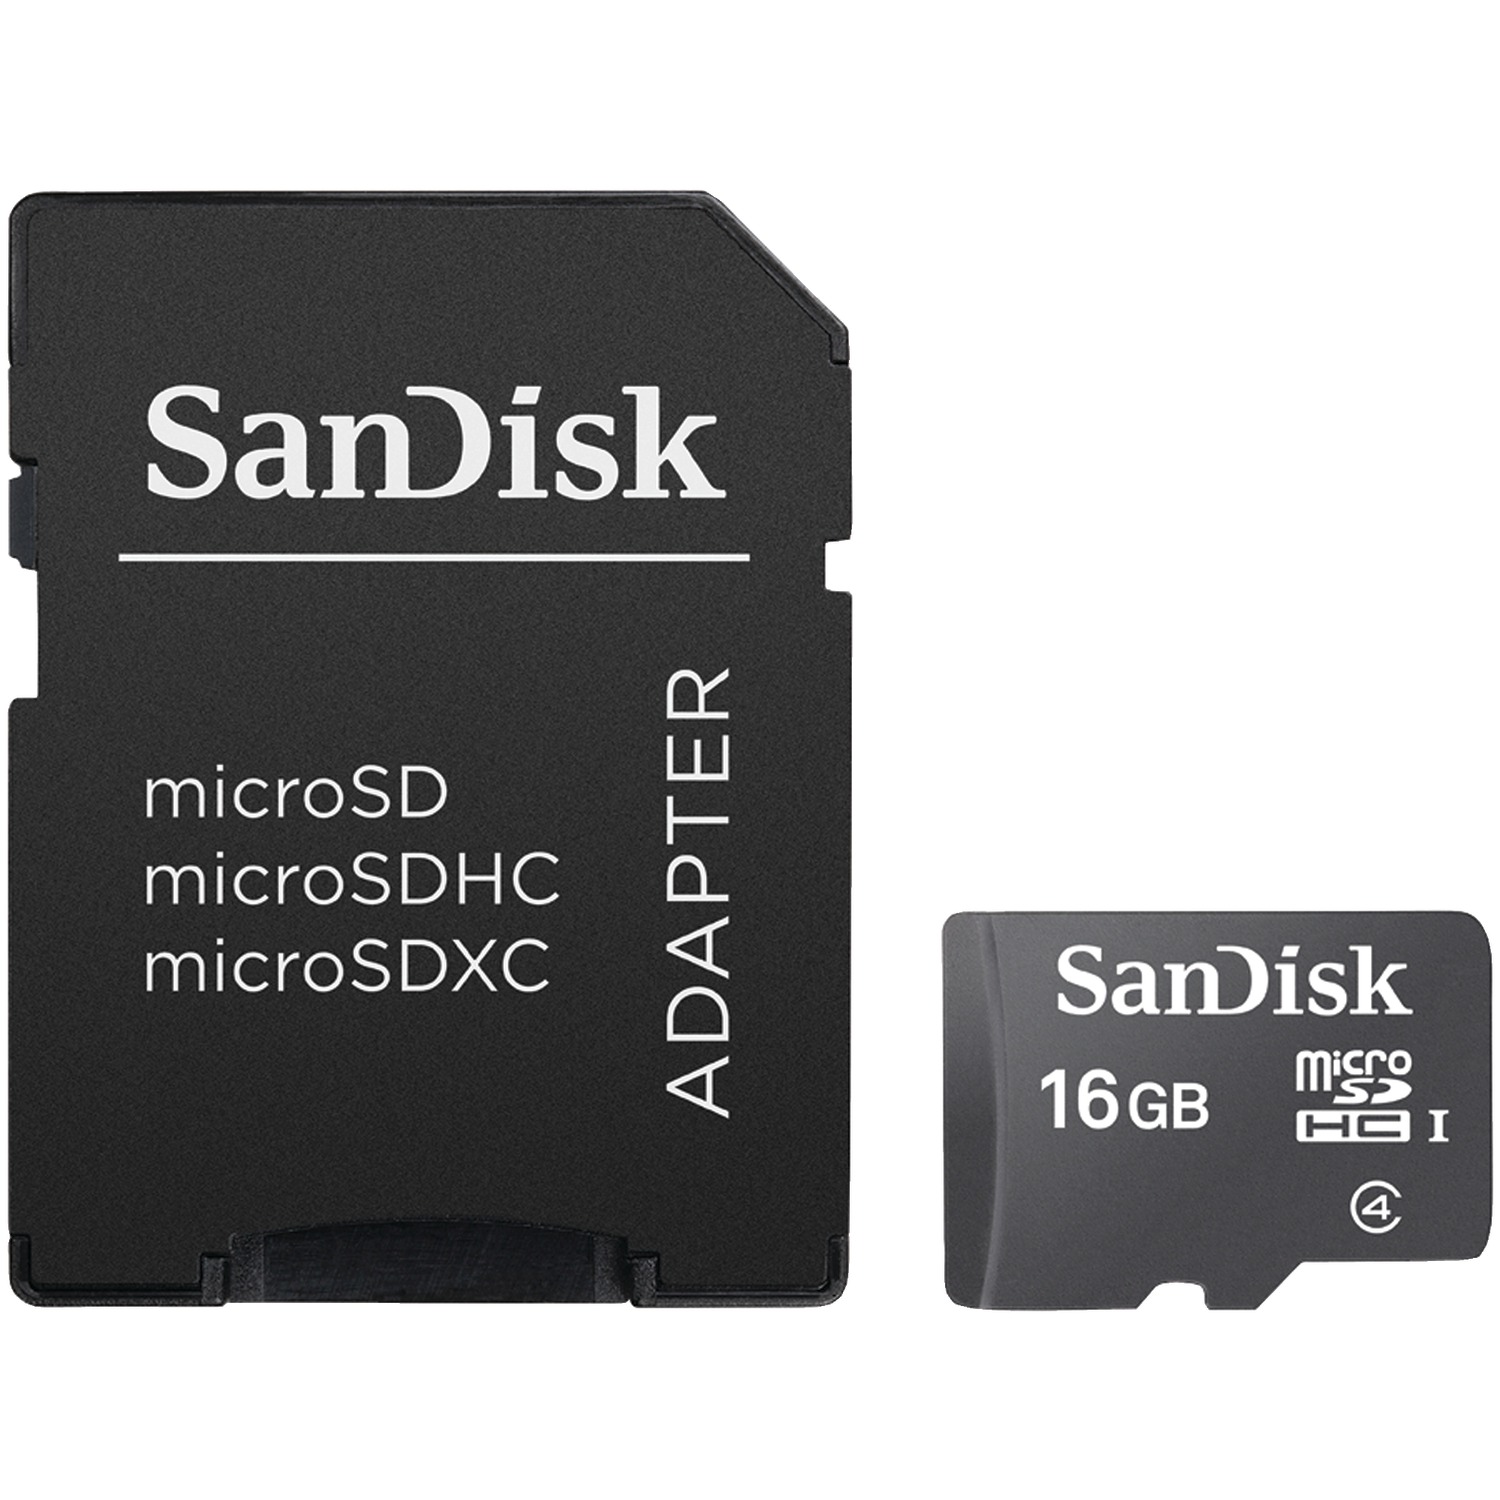 SanDisk 16GB Class 4 MicroSDHC Memory Card with Adapter - image 3 of 5